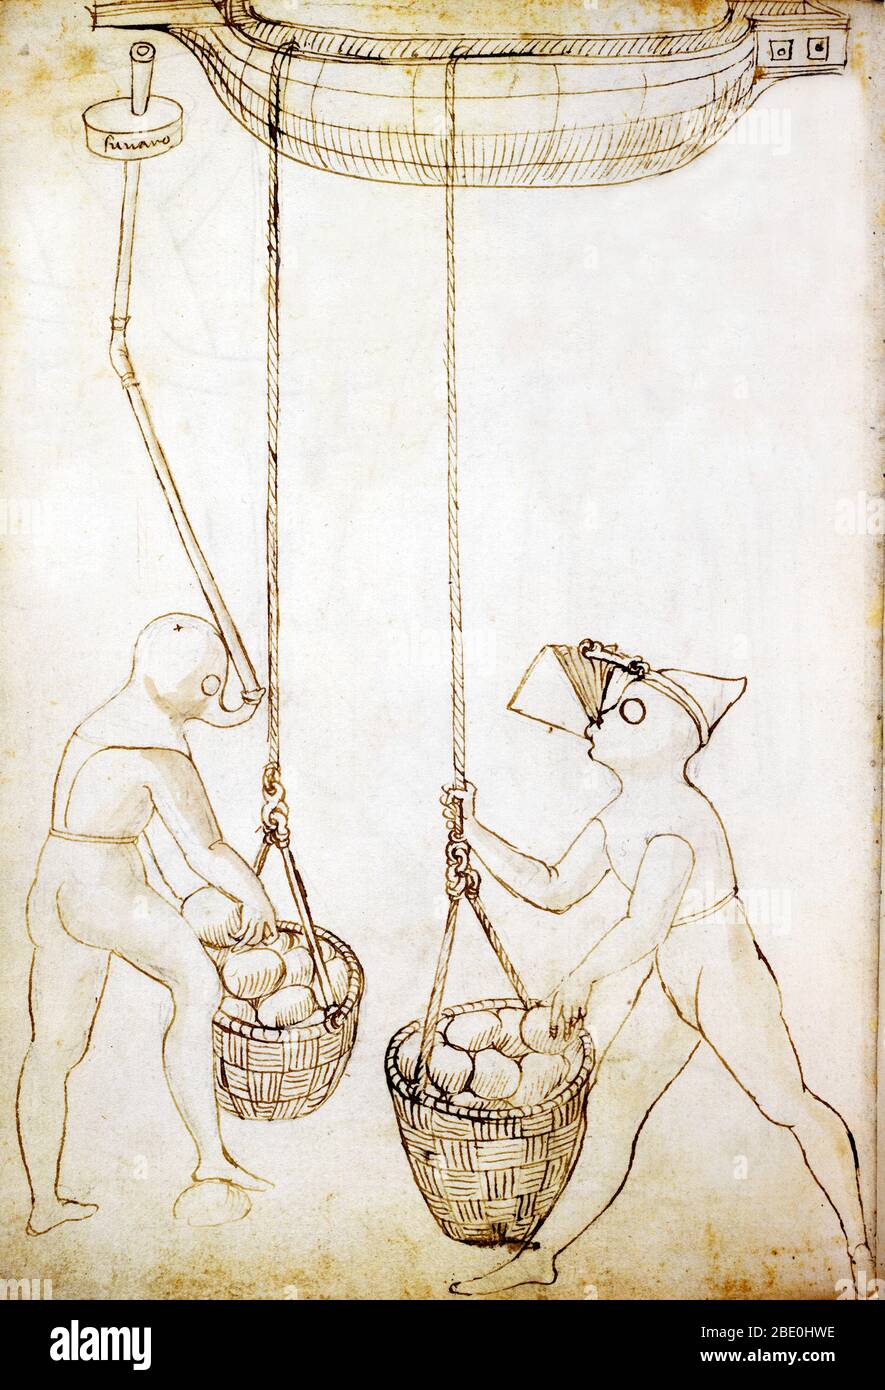 Pen-and-ink drawing showing 15th-century Italian designs for underwater breathing apparatus for divers. From 'Della providentia della chuera,' by Francesco di Giorgio Martini of Siena (1439-1502). Between the Middle Ages and the Renaissance, Siena developed a series of technical specialities. Siena's artist-engineers put their skills into practice for their small republic and demonstrated their skill in depicting machines and mechanical systems. The two most prominent Sienese engineers were Mariano di Iacopo, known as Taccola, and Francesco di Giorgio. Stock Photo